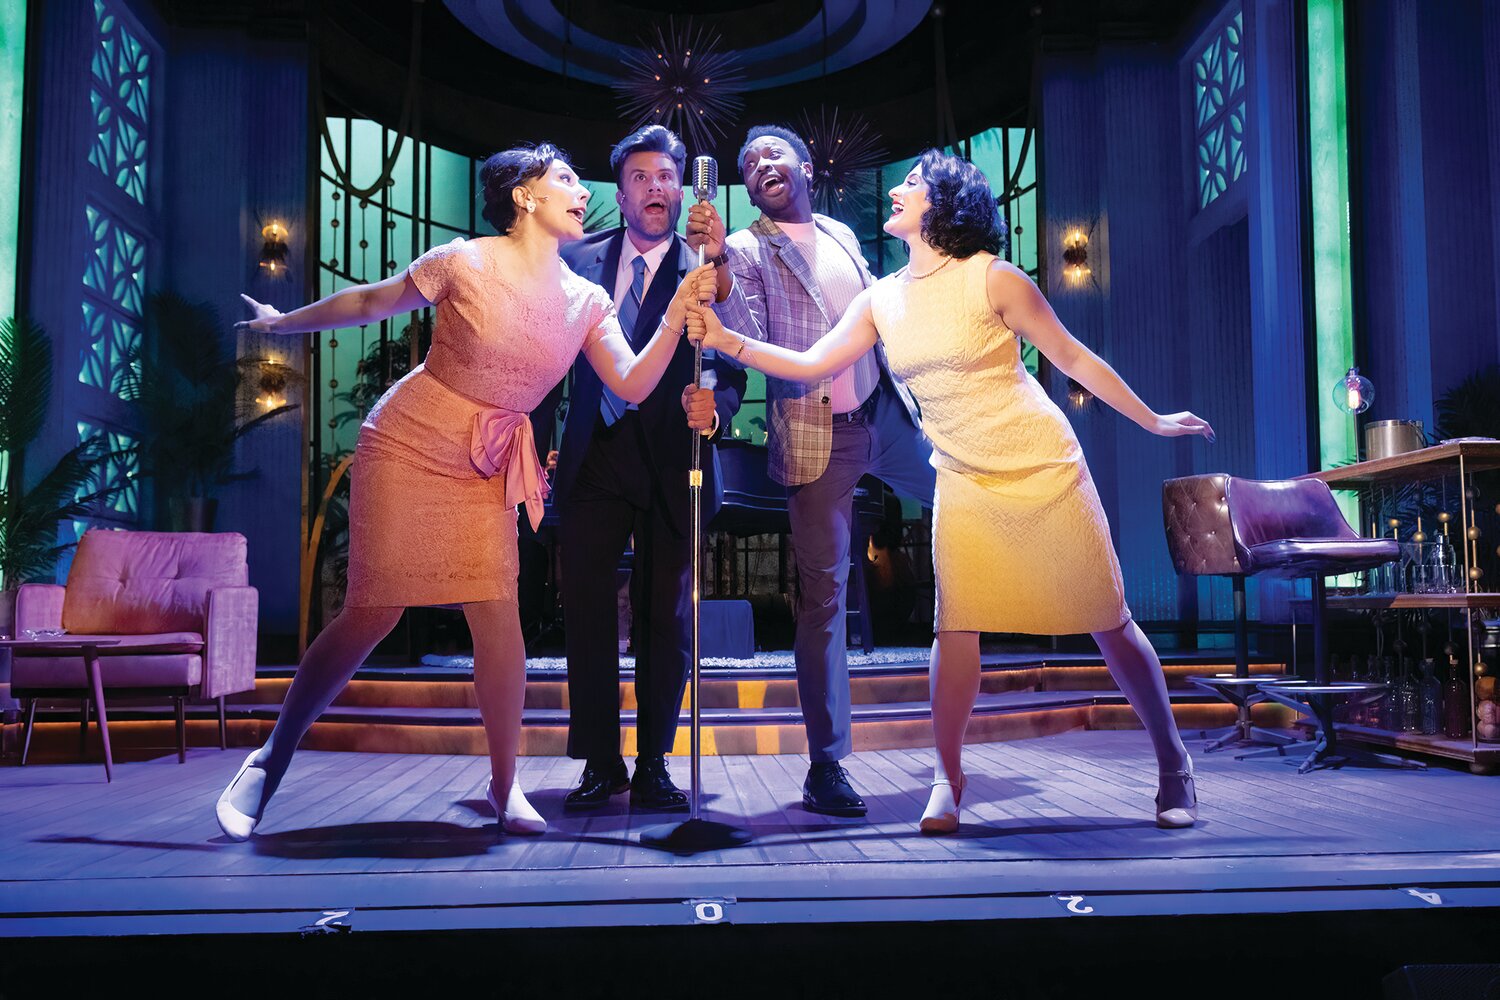 Lucy Horton, Danny Drewes, Christopher Brasfield, and Alyssa Giannetti in “MY WAY: A Musical Tribute To Frank Sinatra” at Theatre By The Sea thru June 11.